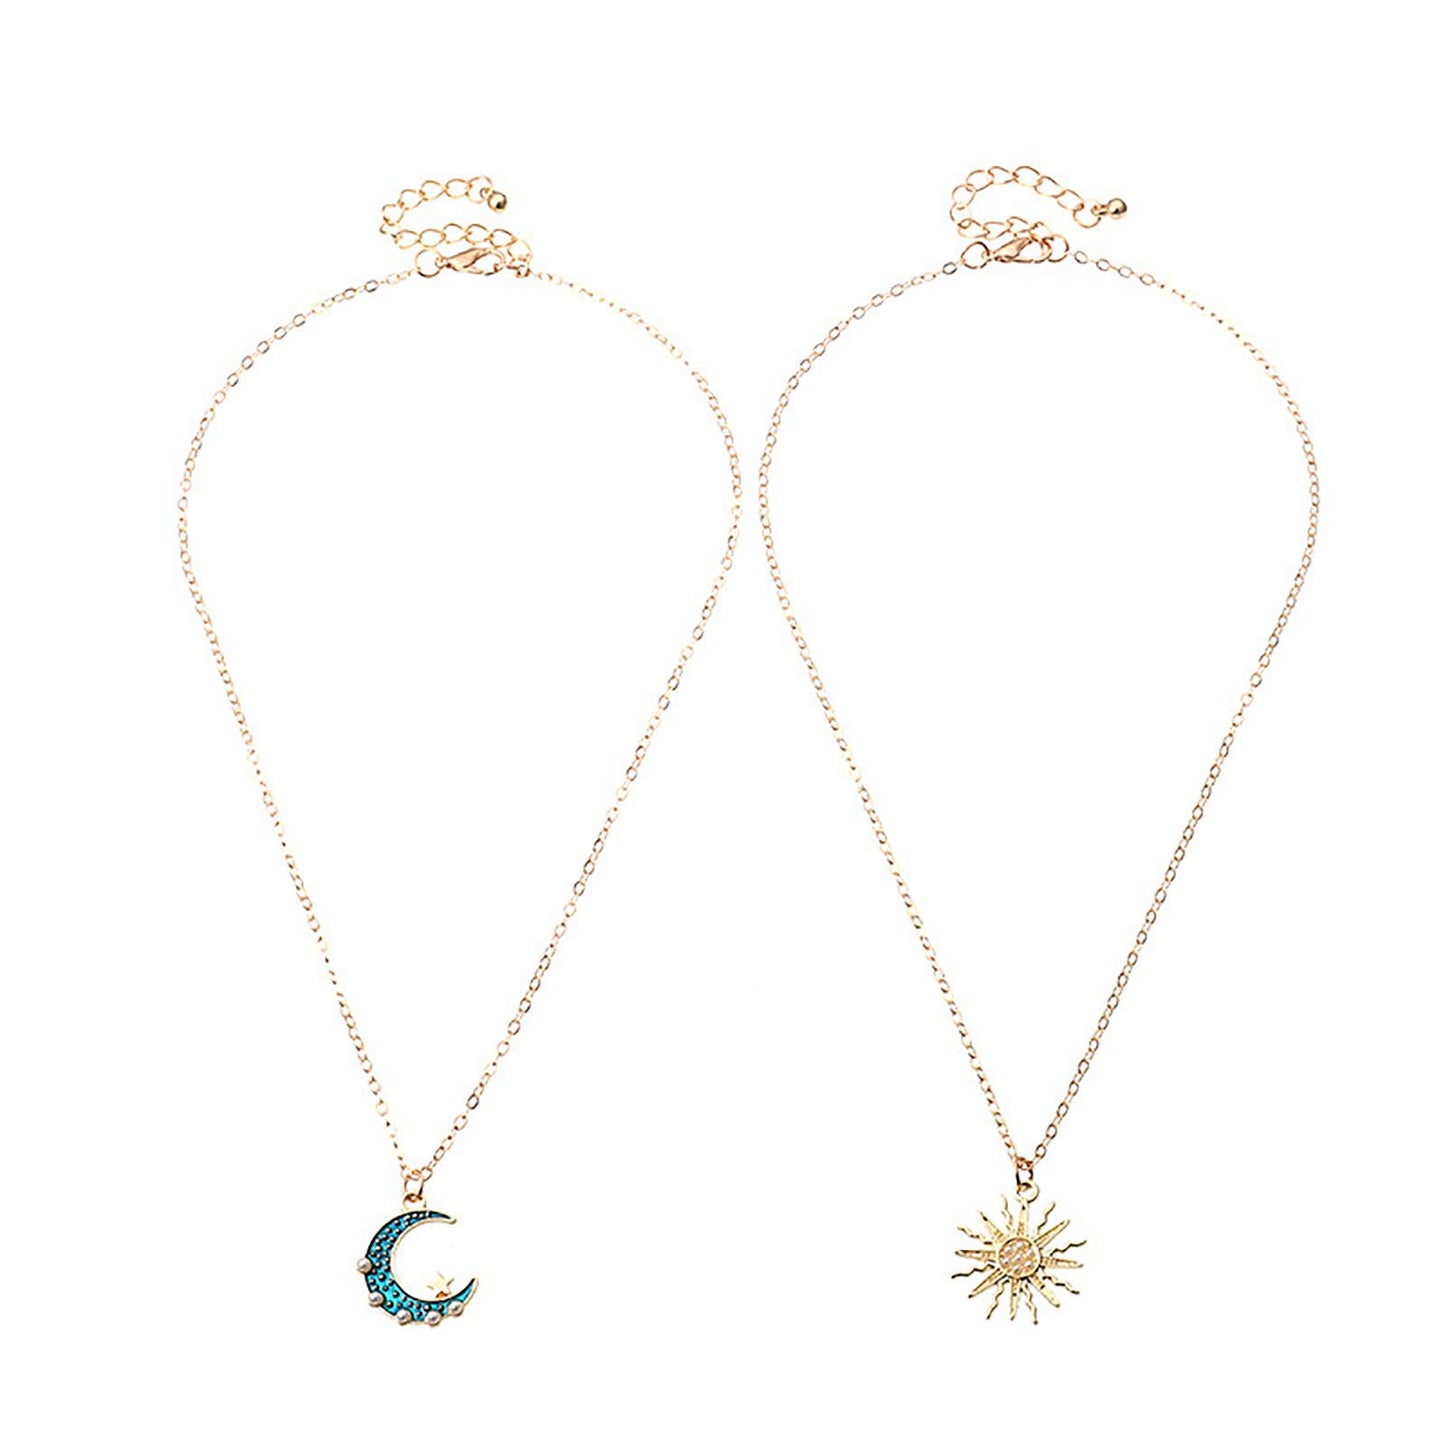 Sun Moon Necklace Blue Gold Stainless Steel Pendant Necklaces Jewelry